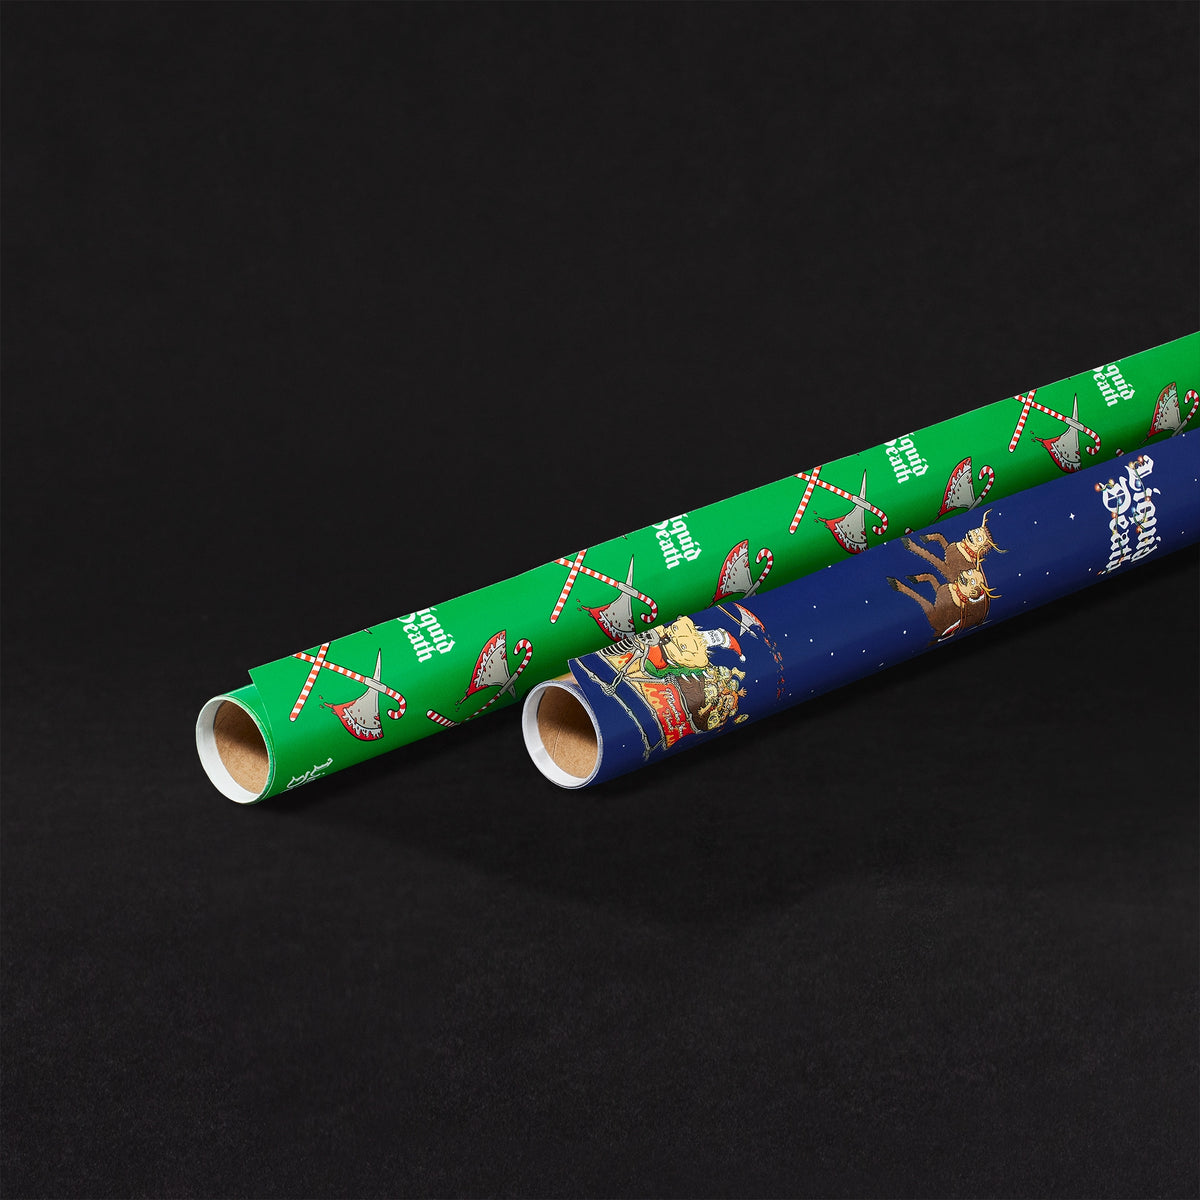 Jolly Death Gift Wrap (2-Pack)